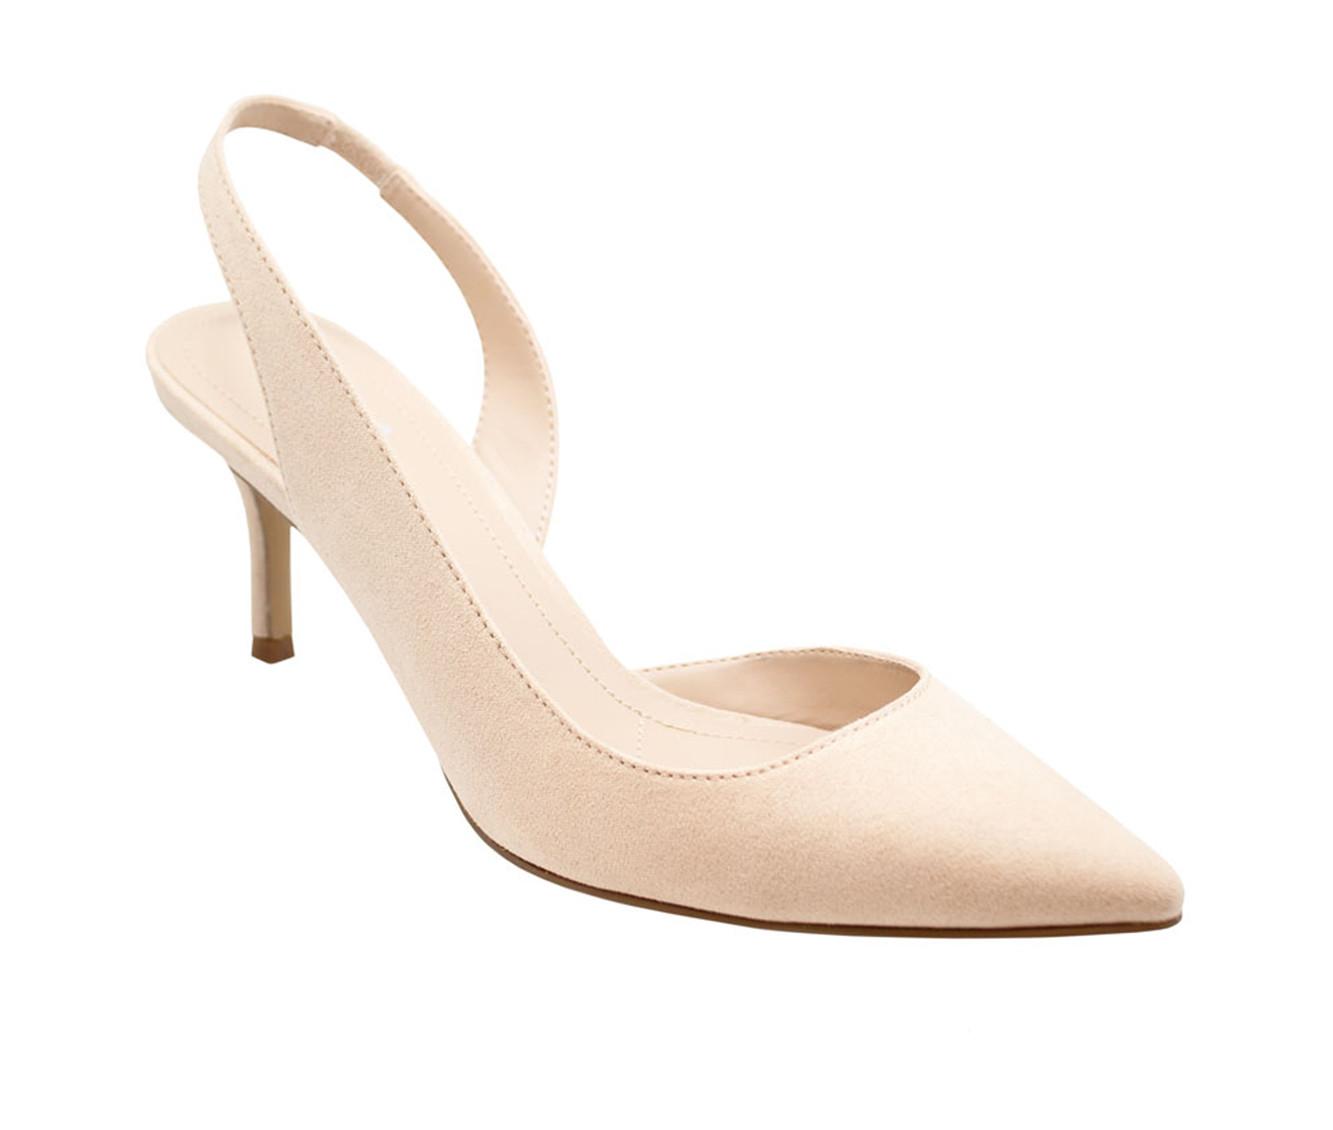 Women's Charles by Charles David Aliby Slingback Pumps